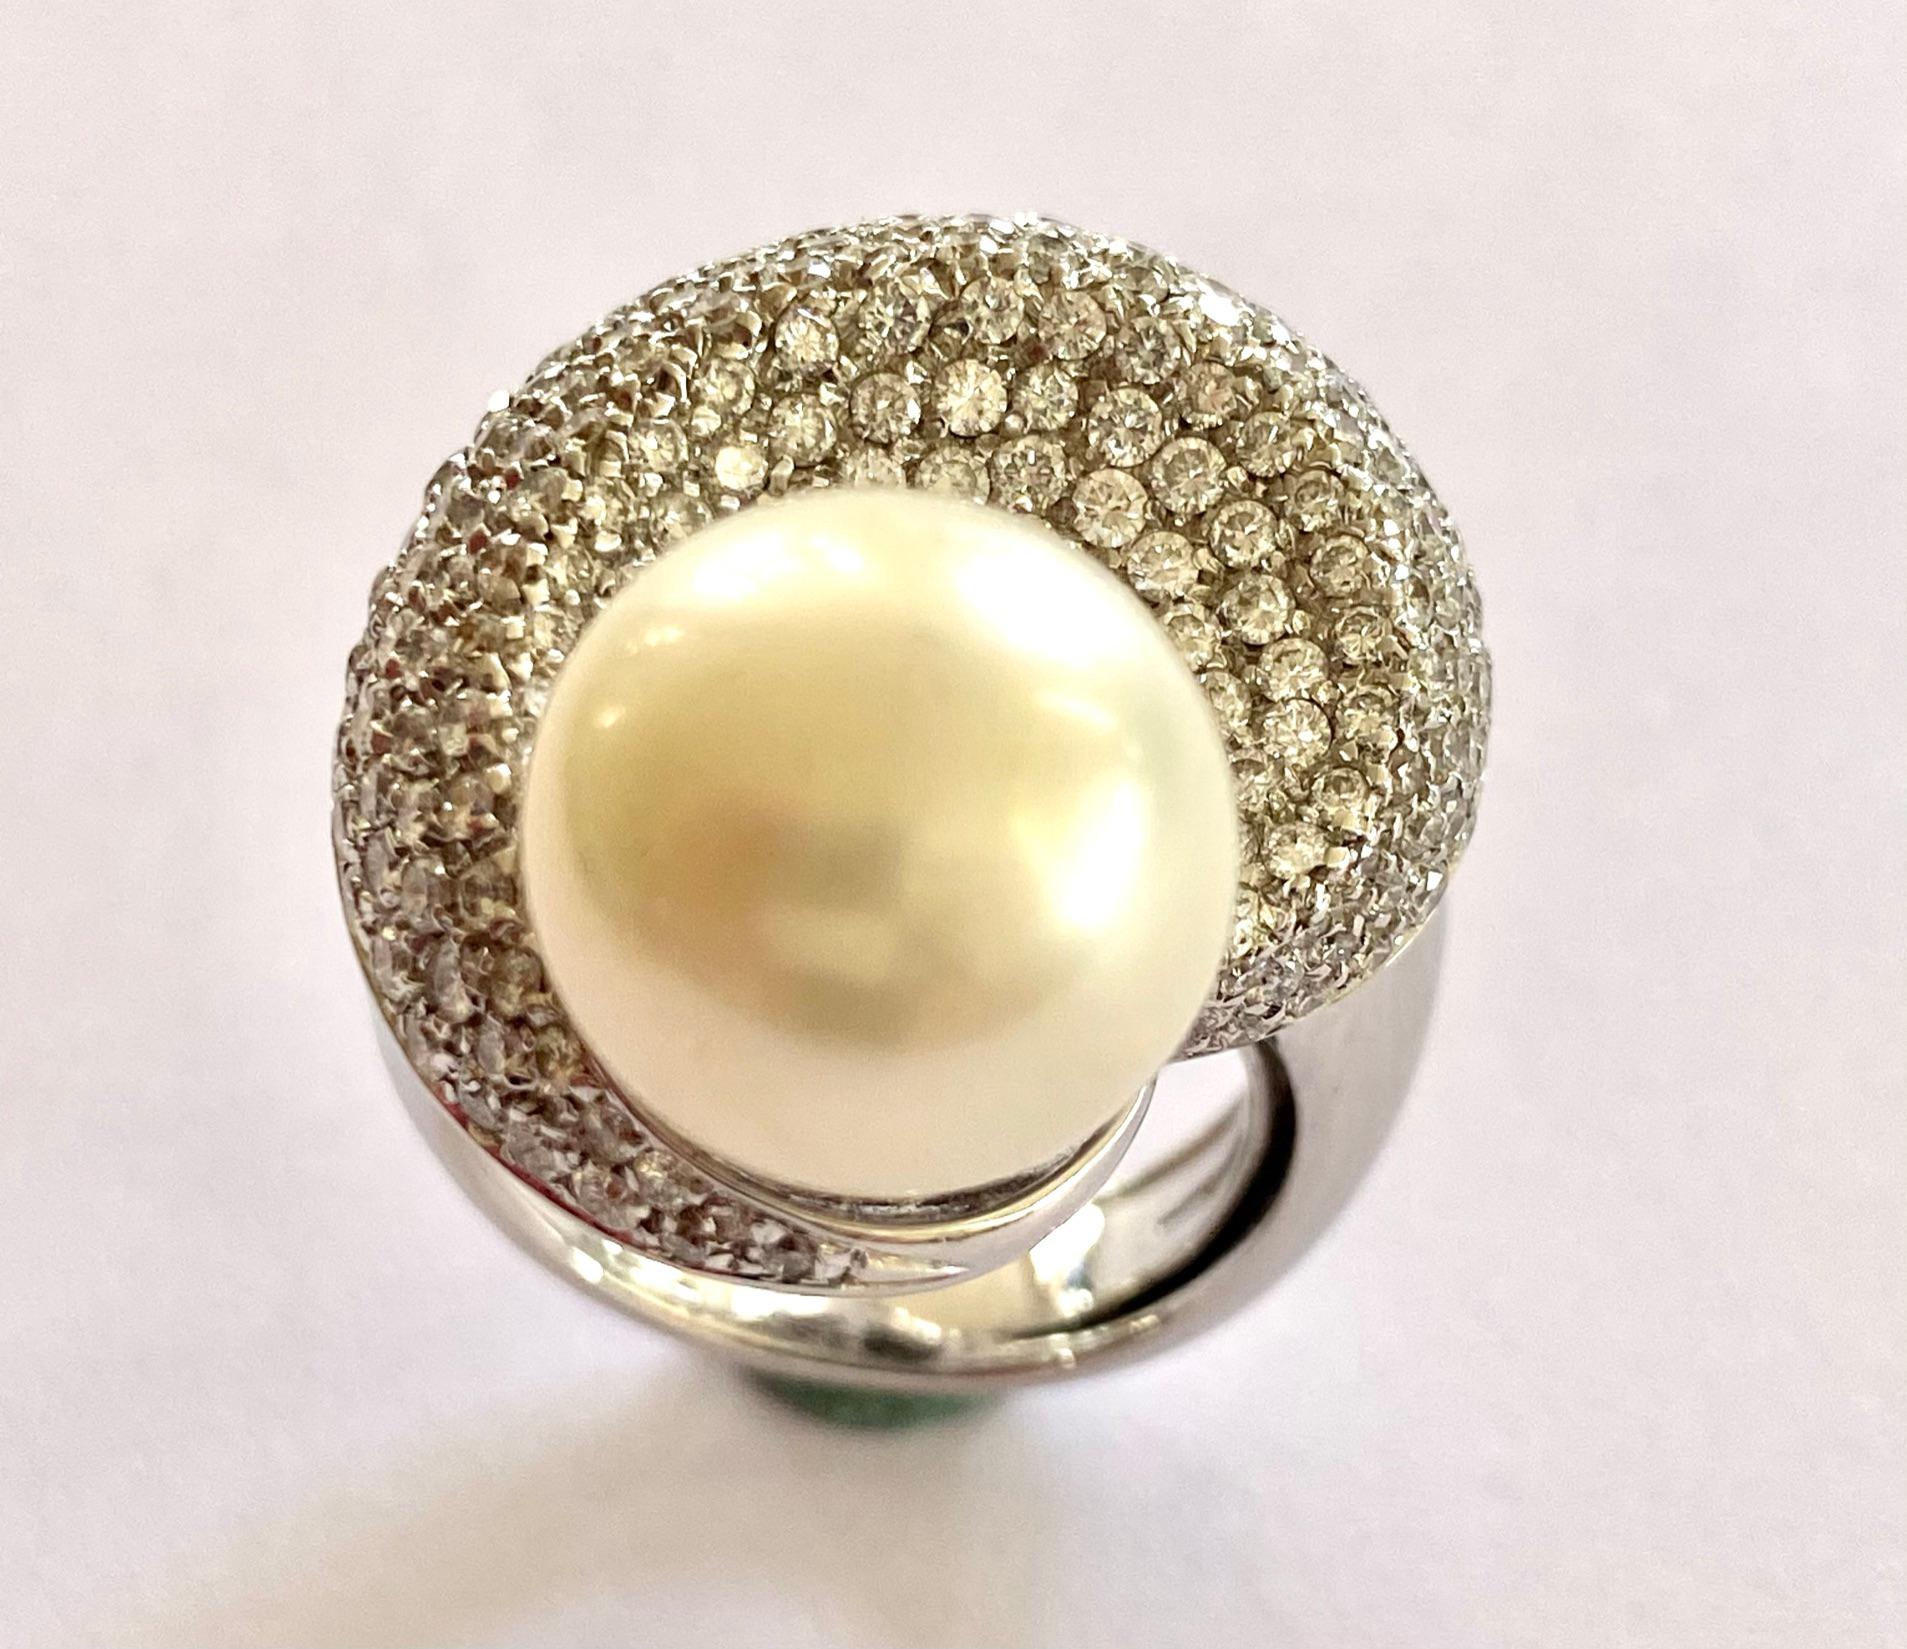 One (1)  18Karat white Gold Ring stamped: Cantamessa & 750 Set with one bear round Cultered South Sea Pearl en 218 brilliant Cut Diamonds on the siders
Totel diamonds Weight: 2.55 ct.  VSI- E-F
Total Weight pearl: 15.00 ct  (diameter: 12.5 mm)
Total